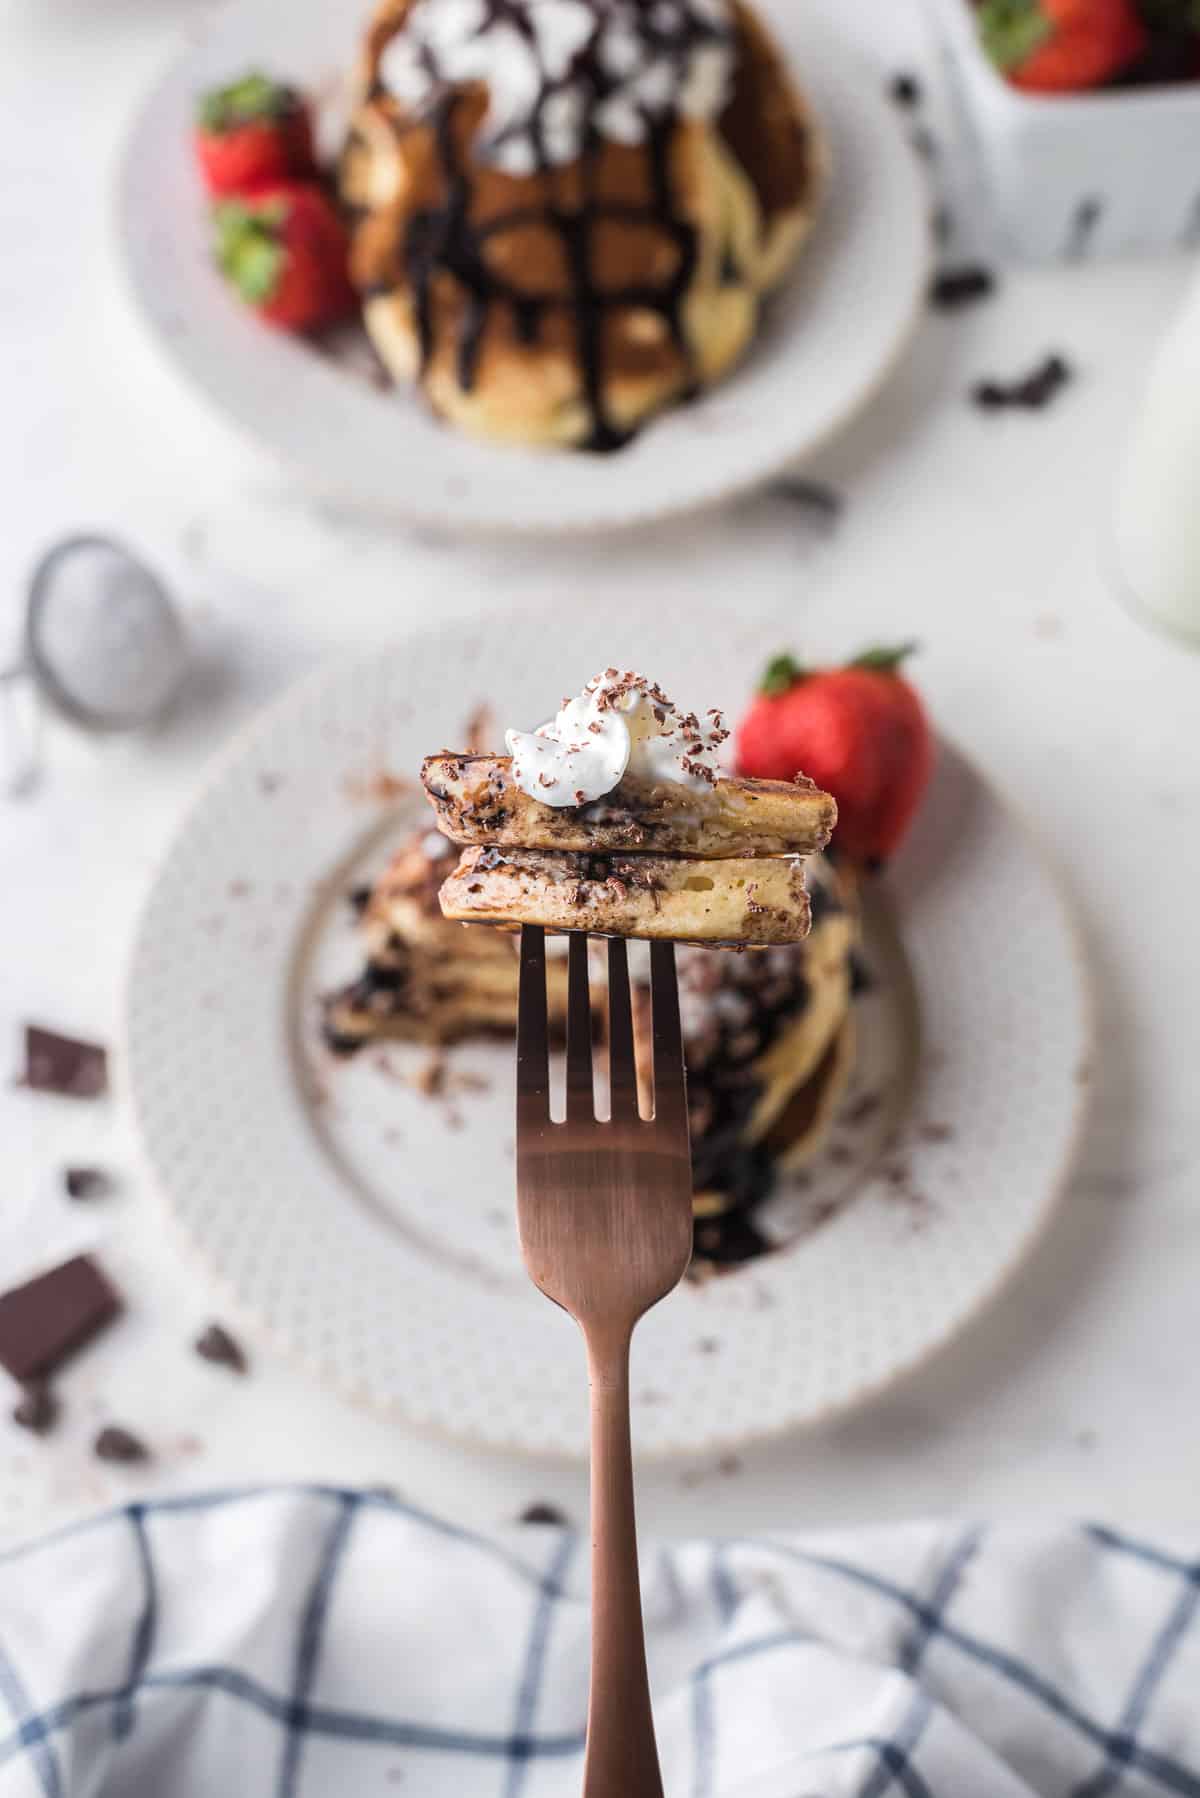 Cut pancake on a fork, showing chocolate chips.